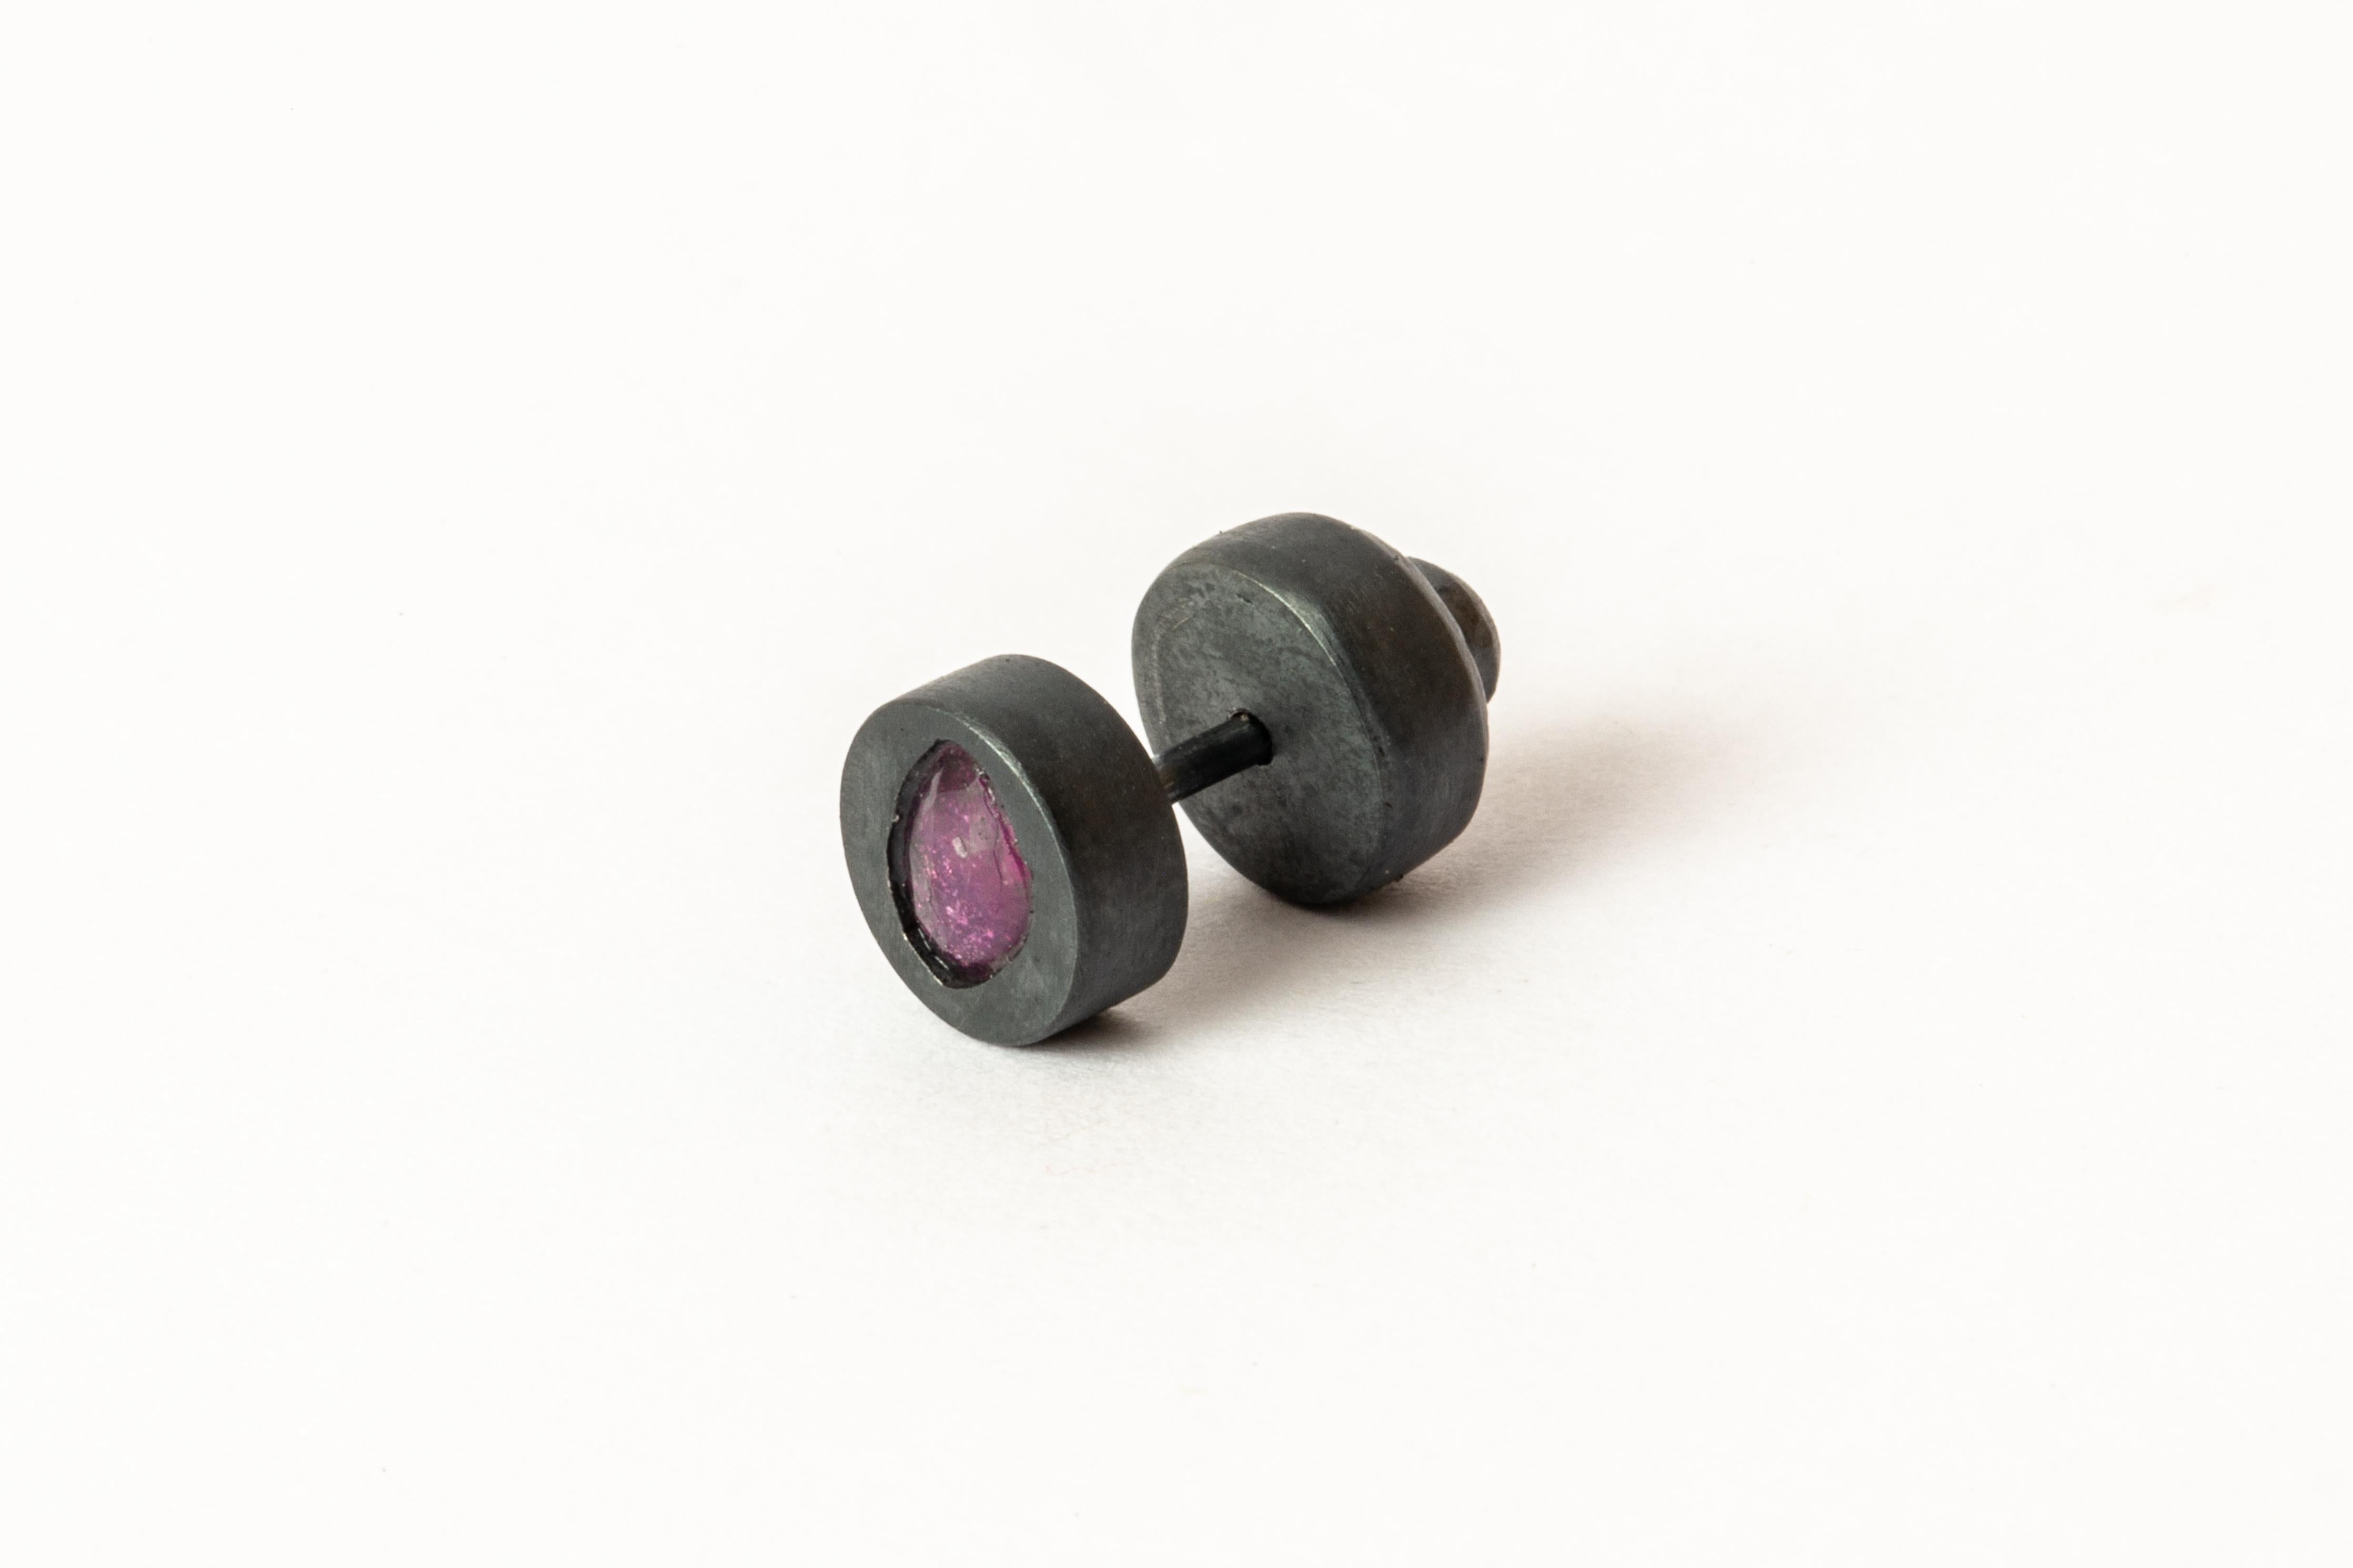 Stud earring in sterling silver and a slab of rough ruby (faceted). This item is made with a naturally occurring element and will vary from the photograph you see. Each piece is unique and this is what makes it special. Please note that Black